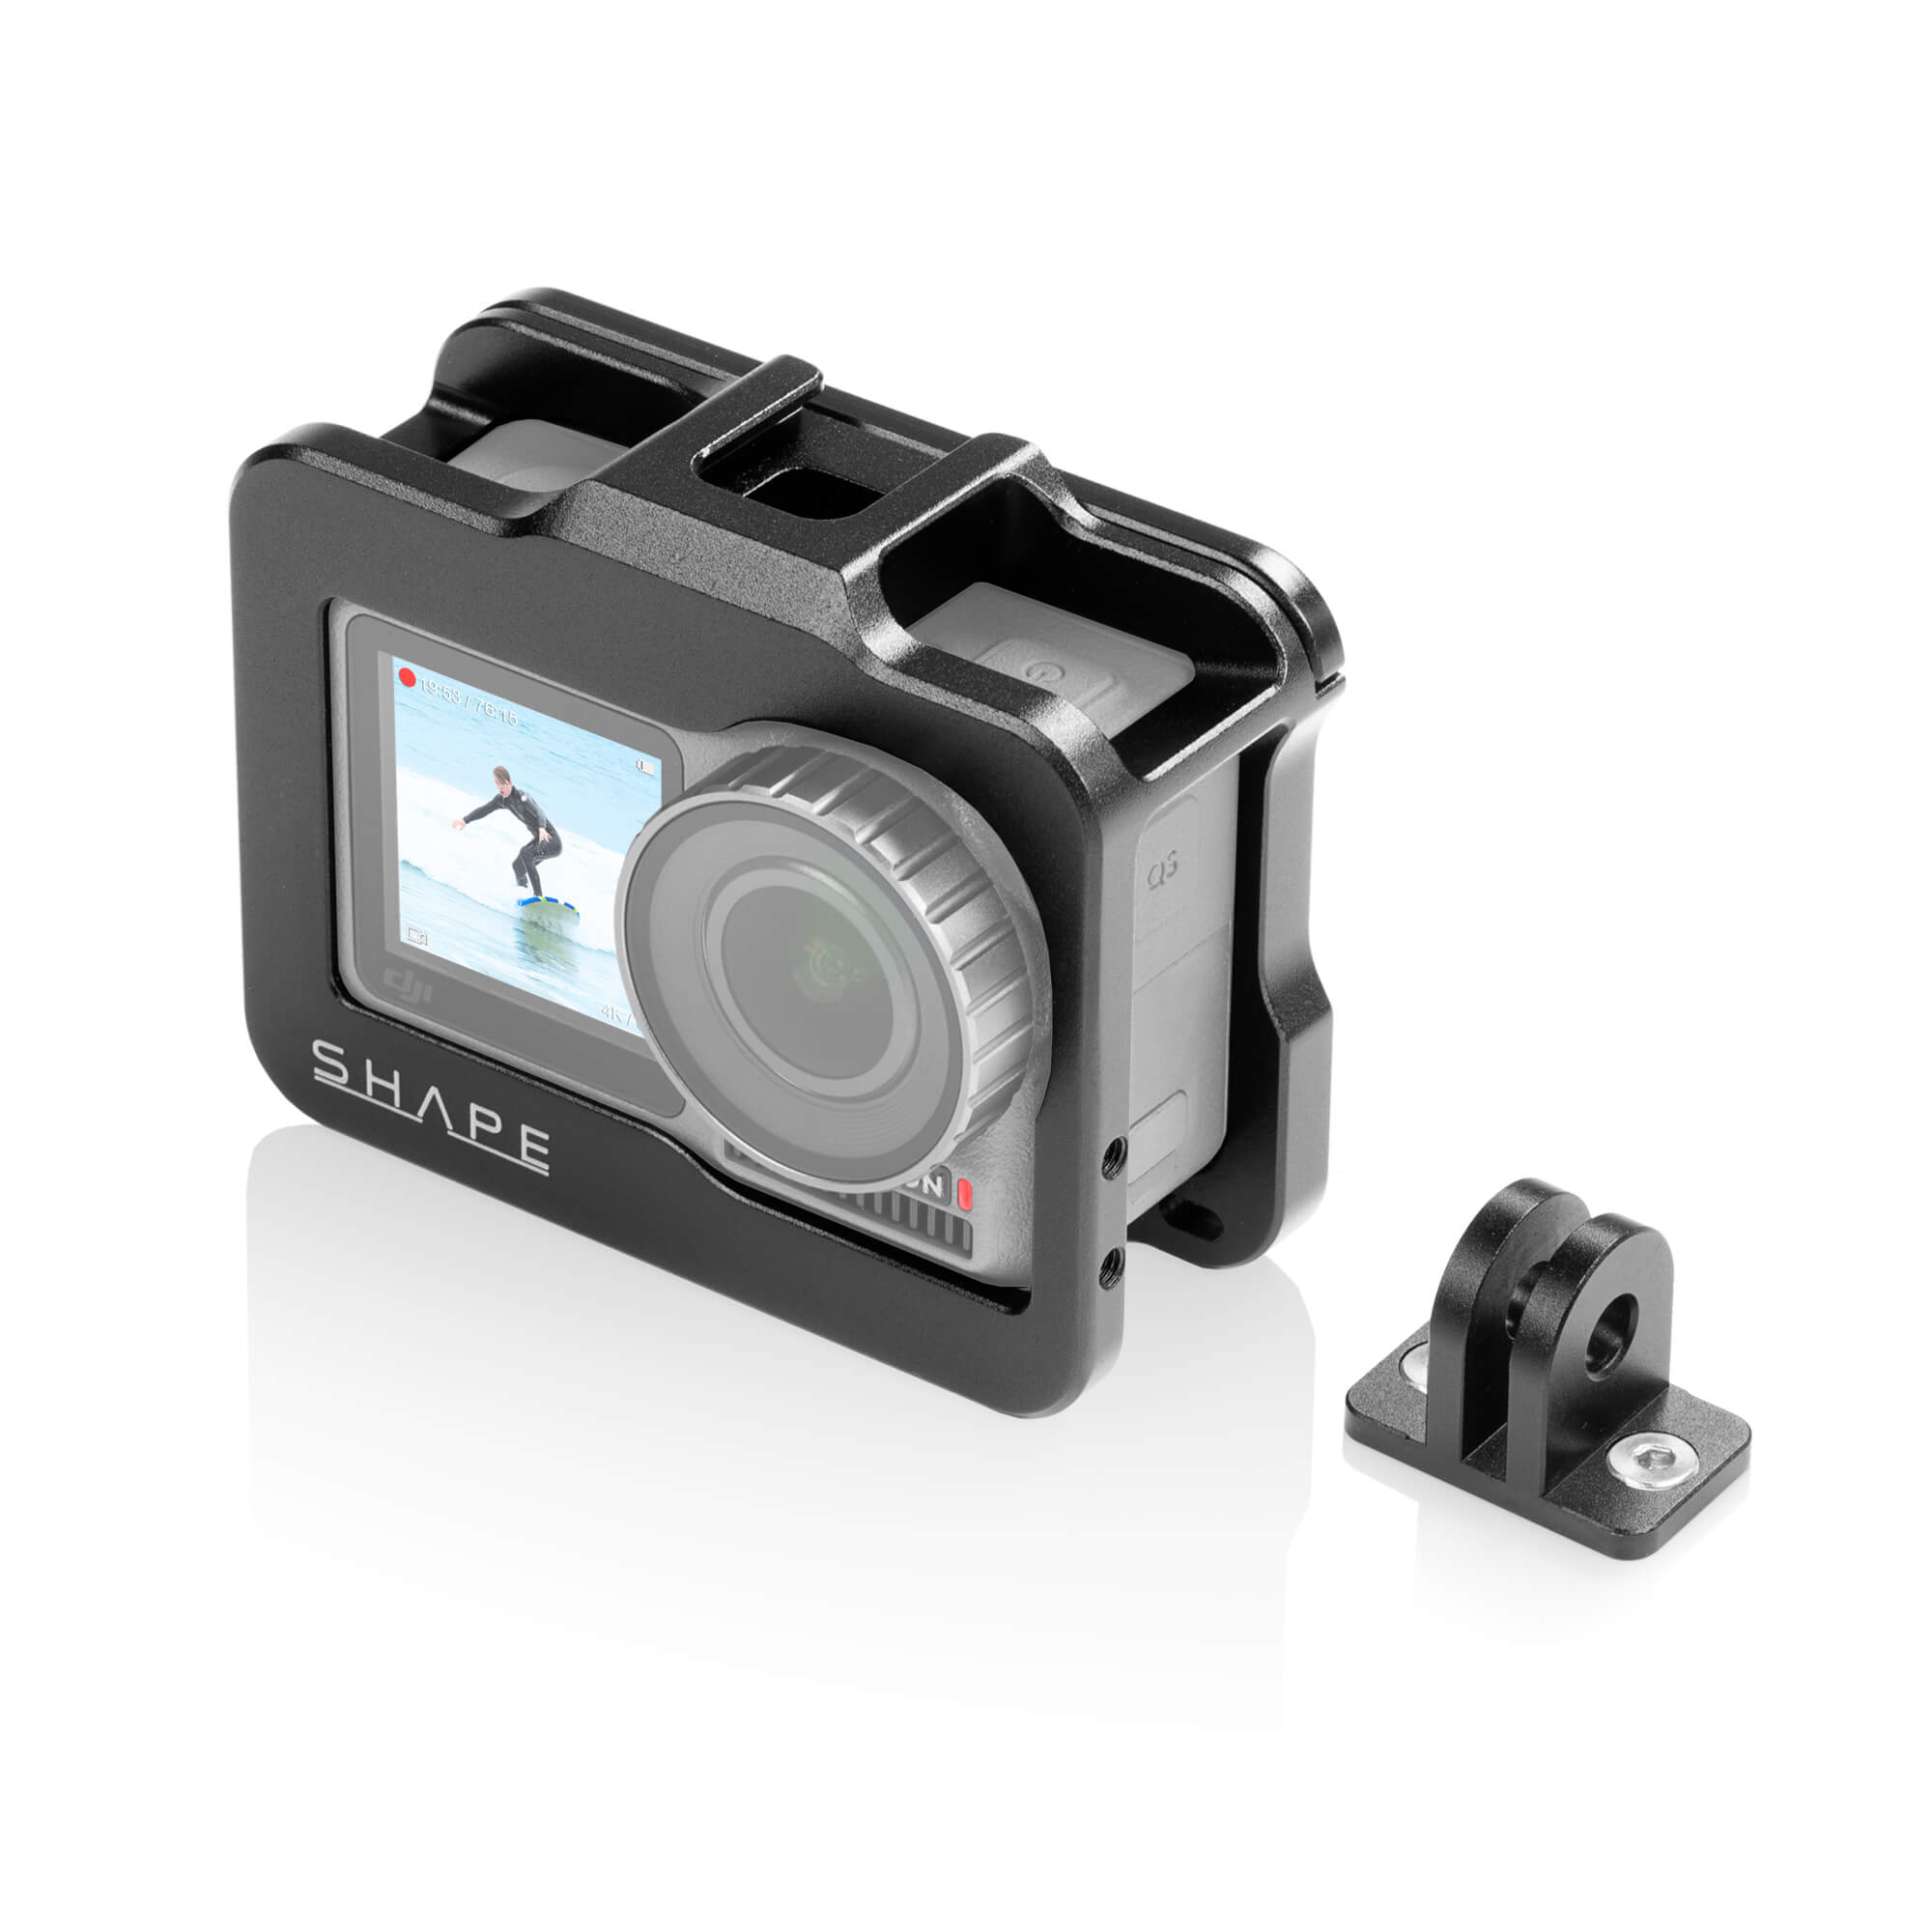 SHAPE cage for DJI Osmo action camera - SHAPE